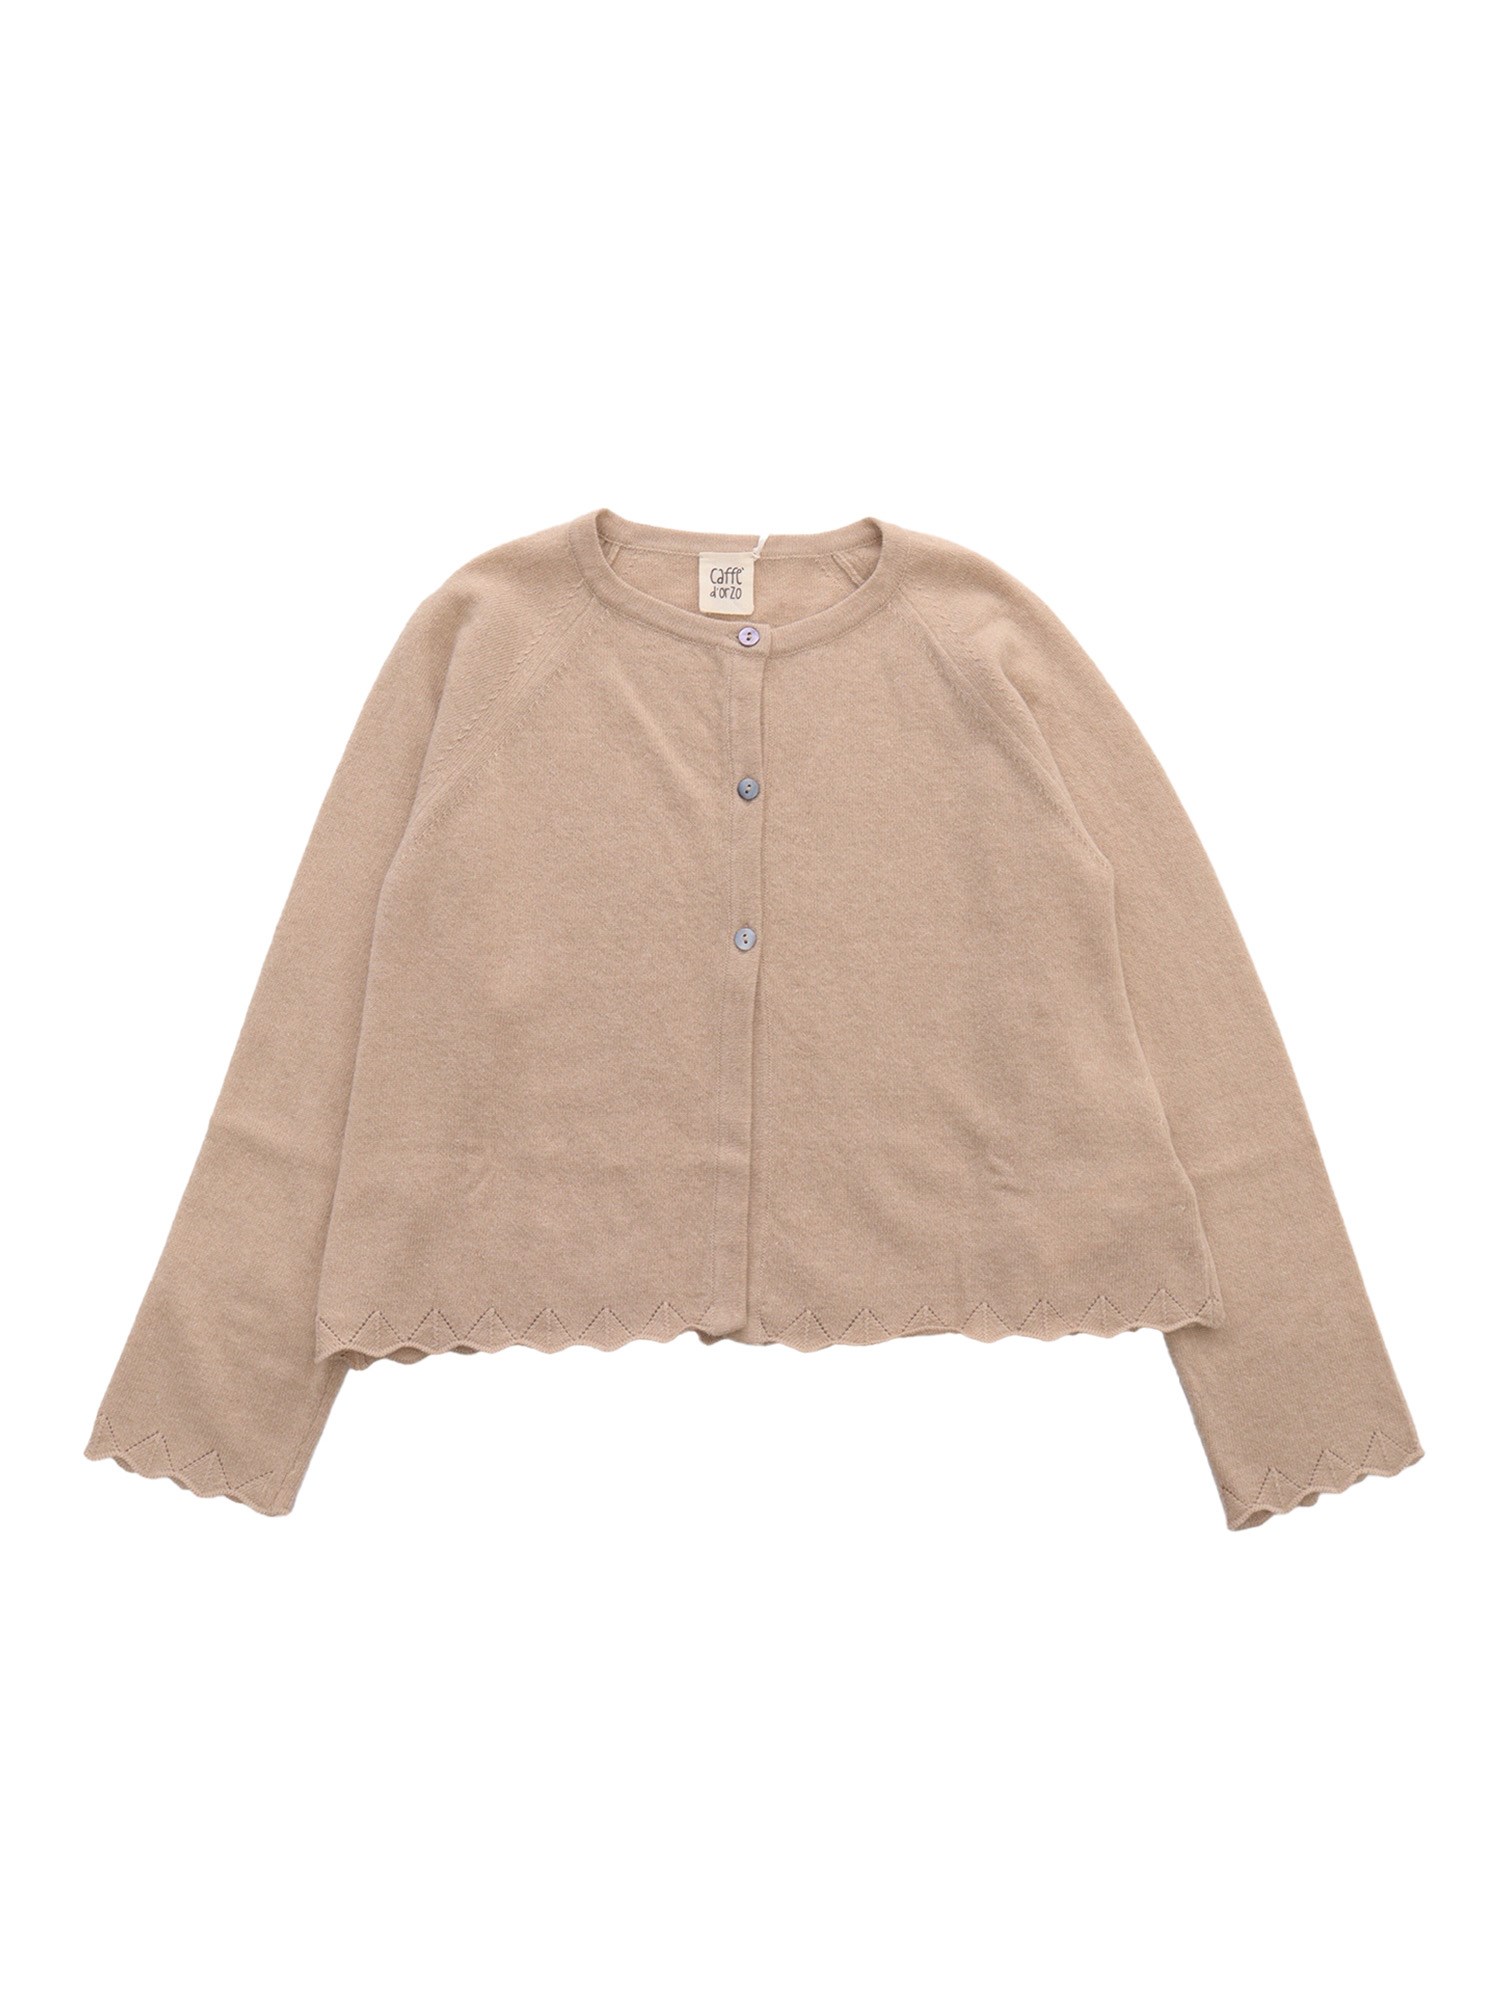 Caffe' D'orzo Zoe Cardigan In Brown